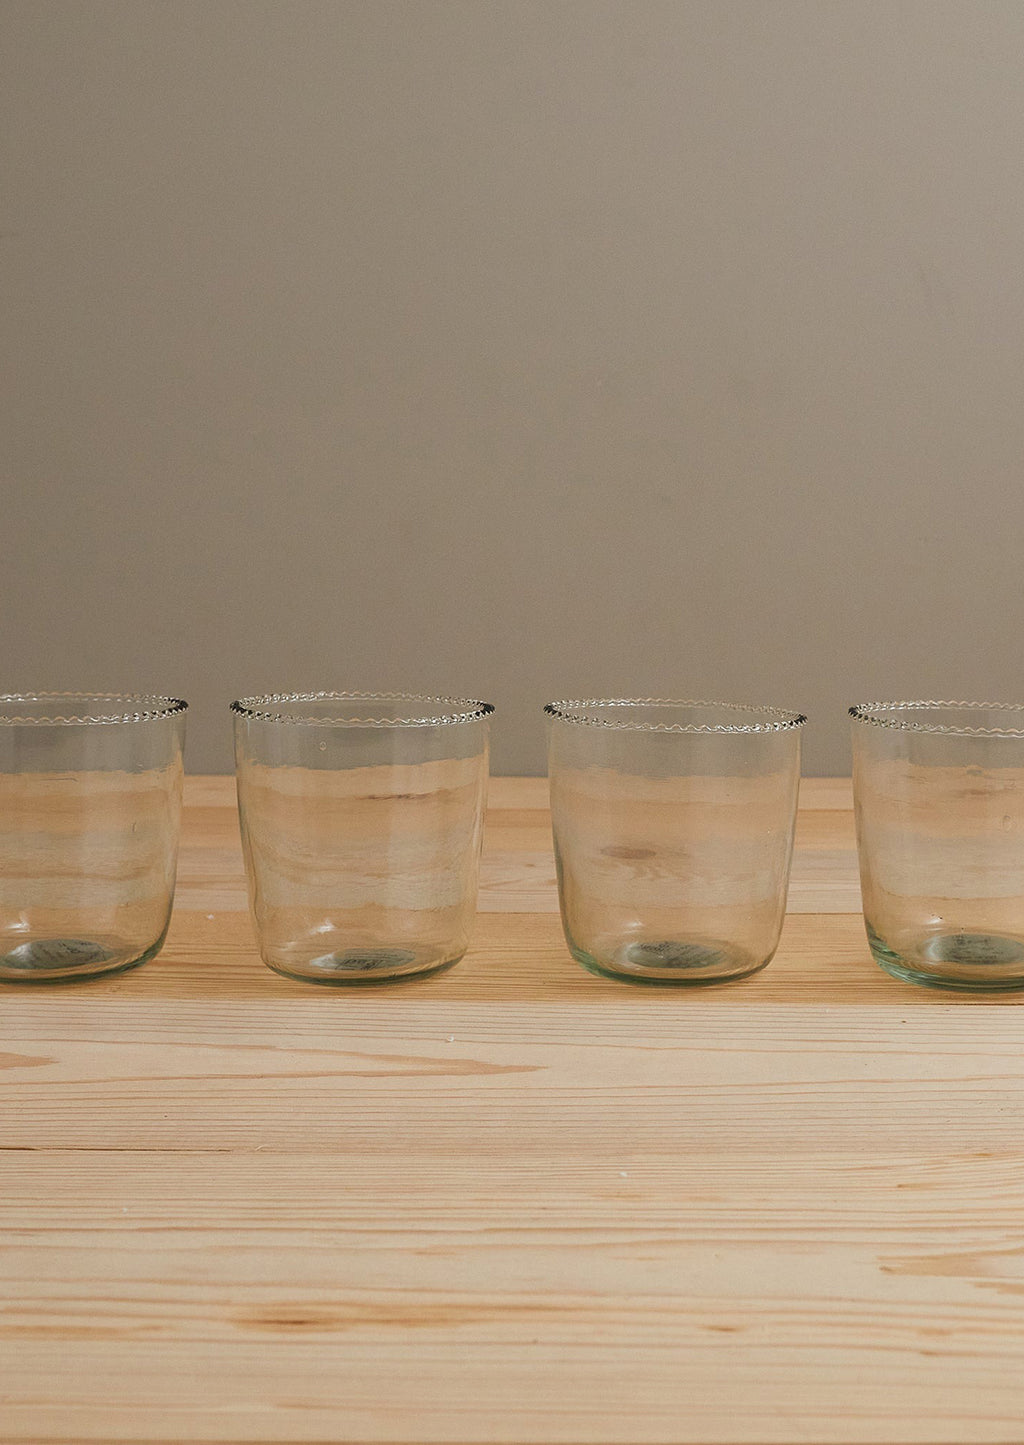 Classic: Drinking glasses with small ruffle edge.